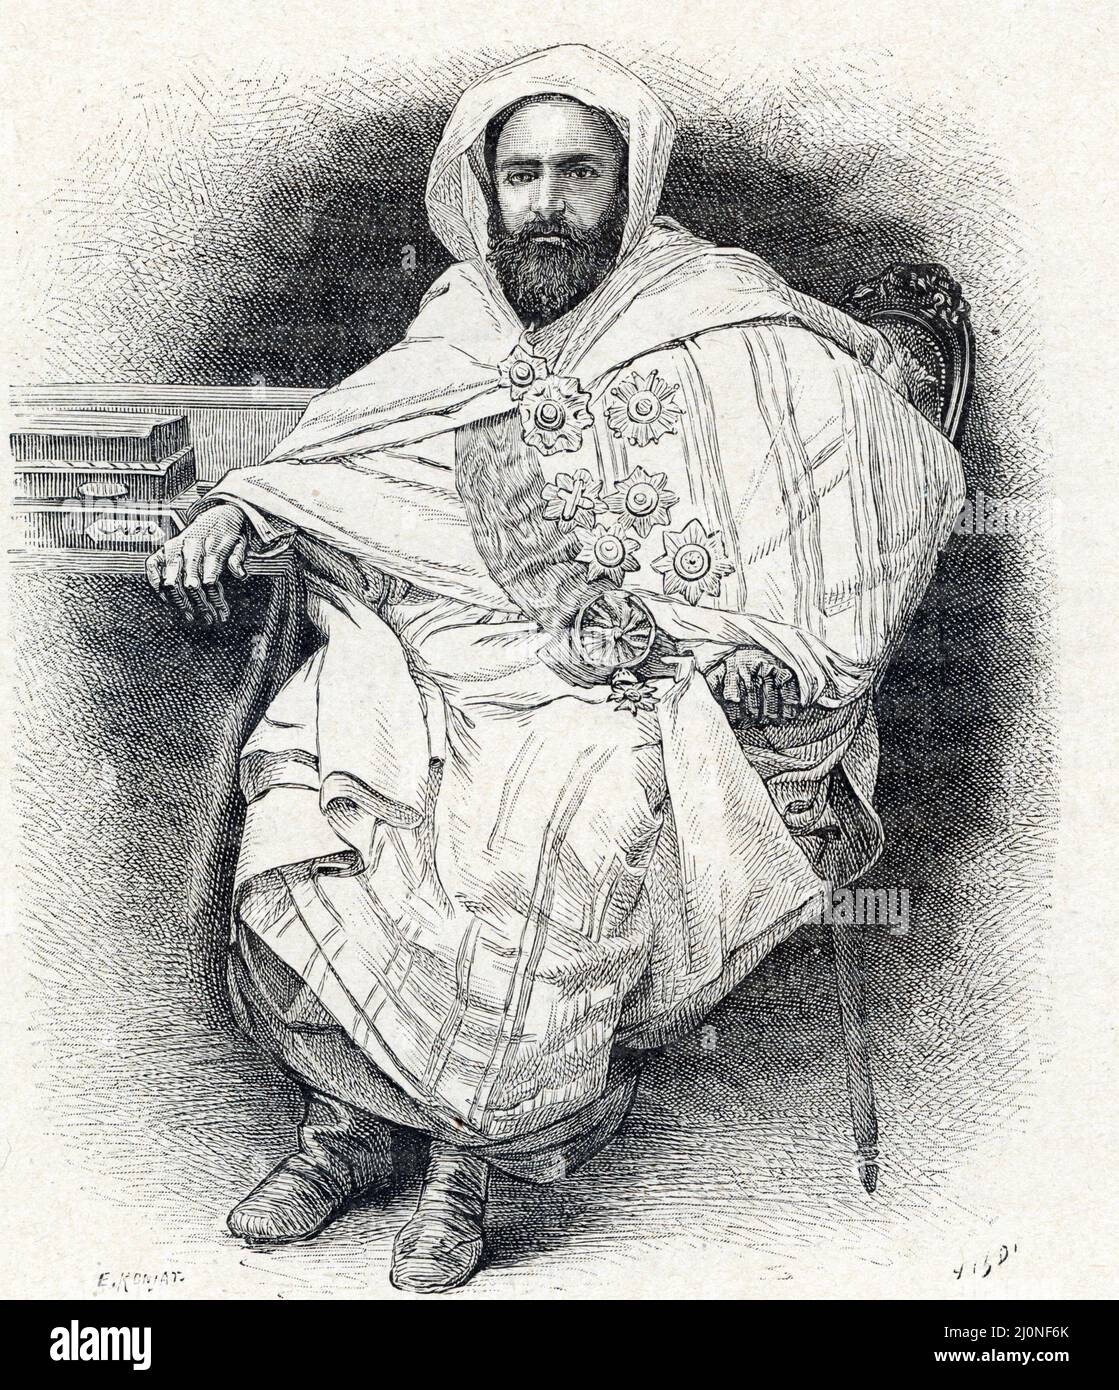 Portrait d'Abdelkader ibn Muhieddine ou emir Abdelkader (abd-el-kader ou abd el kader), ou Abdelkader El Djezairi (1808-1883) (Emir Abdelkader an Algerian religious and military leader who led a struggle against the French colonial invasion of Algiers in the early 19th century) Gravure tiree de 'La France a travers les siecles' de Witt 1897 Collection privee Stock Photo